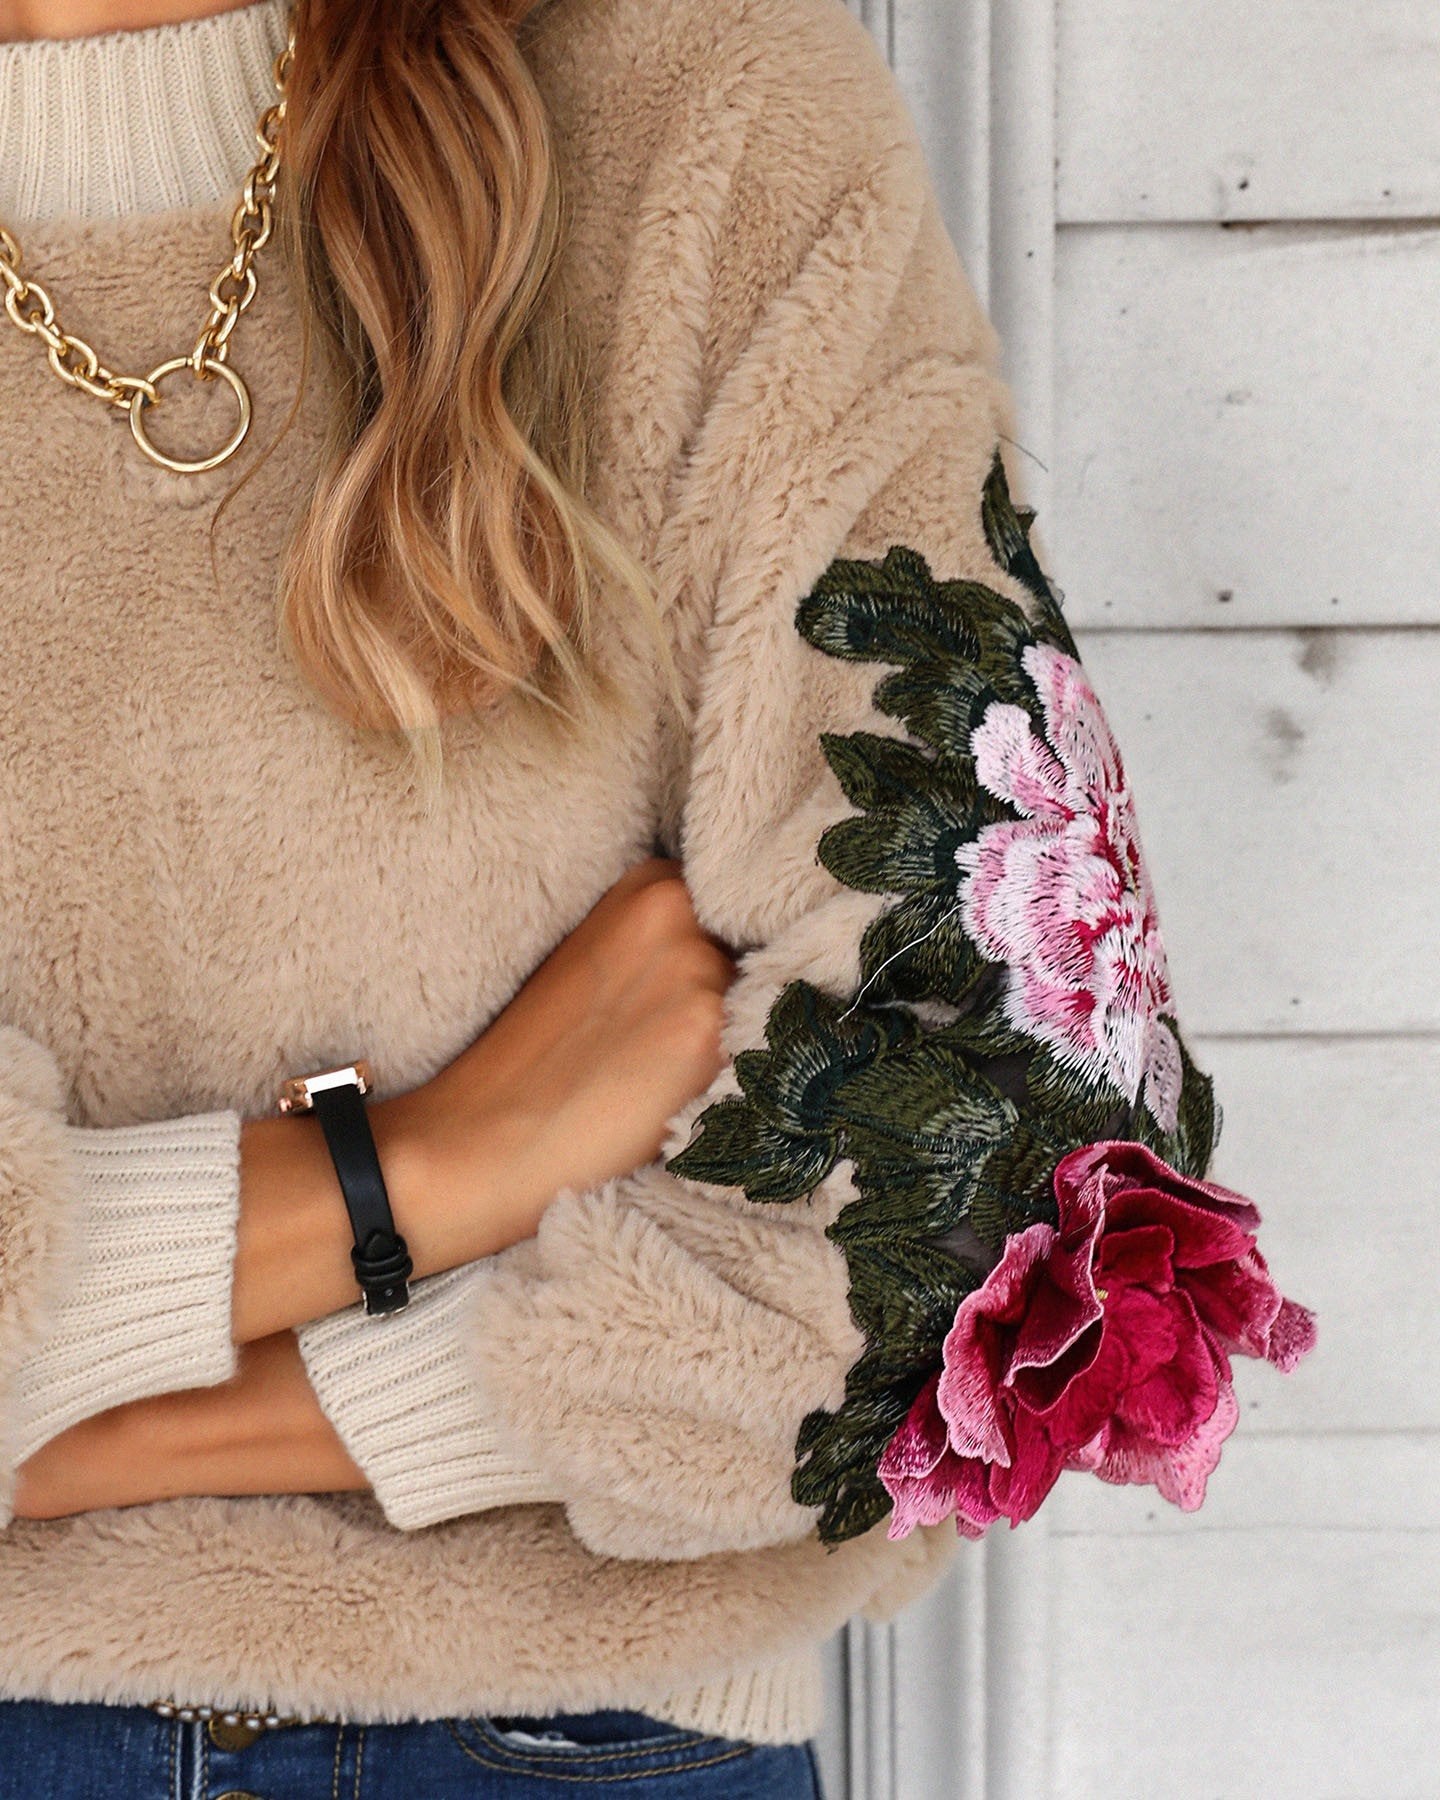 Floral Pattern Embroidery Fluffy Sweater